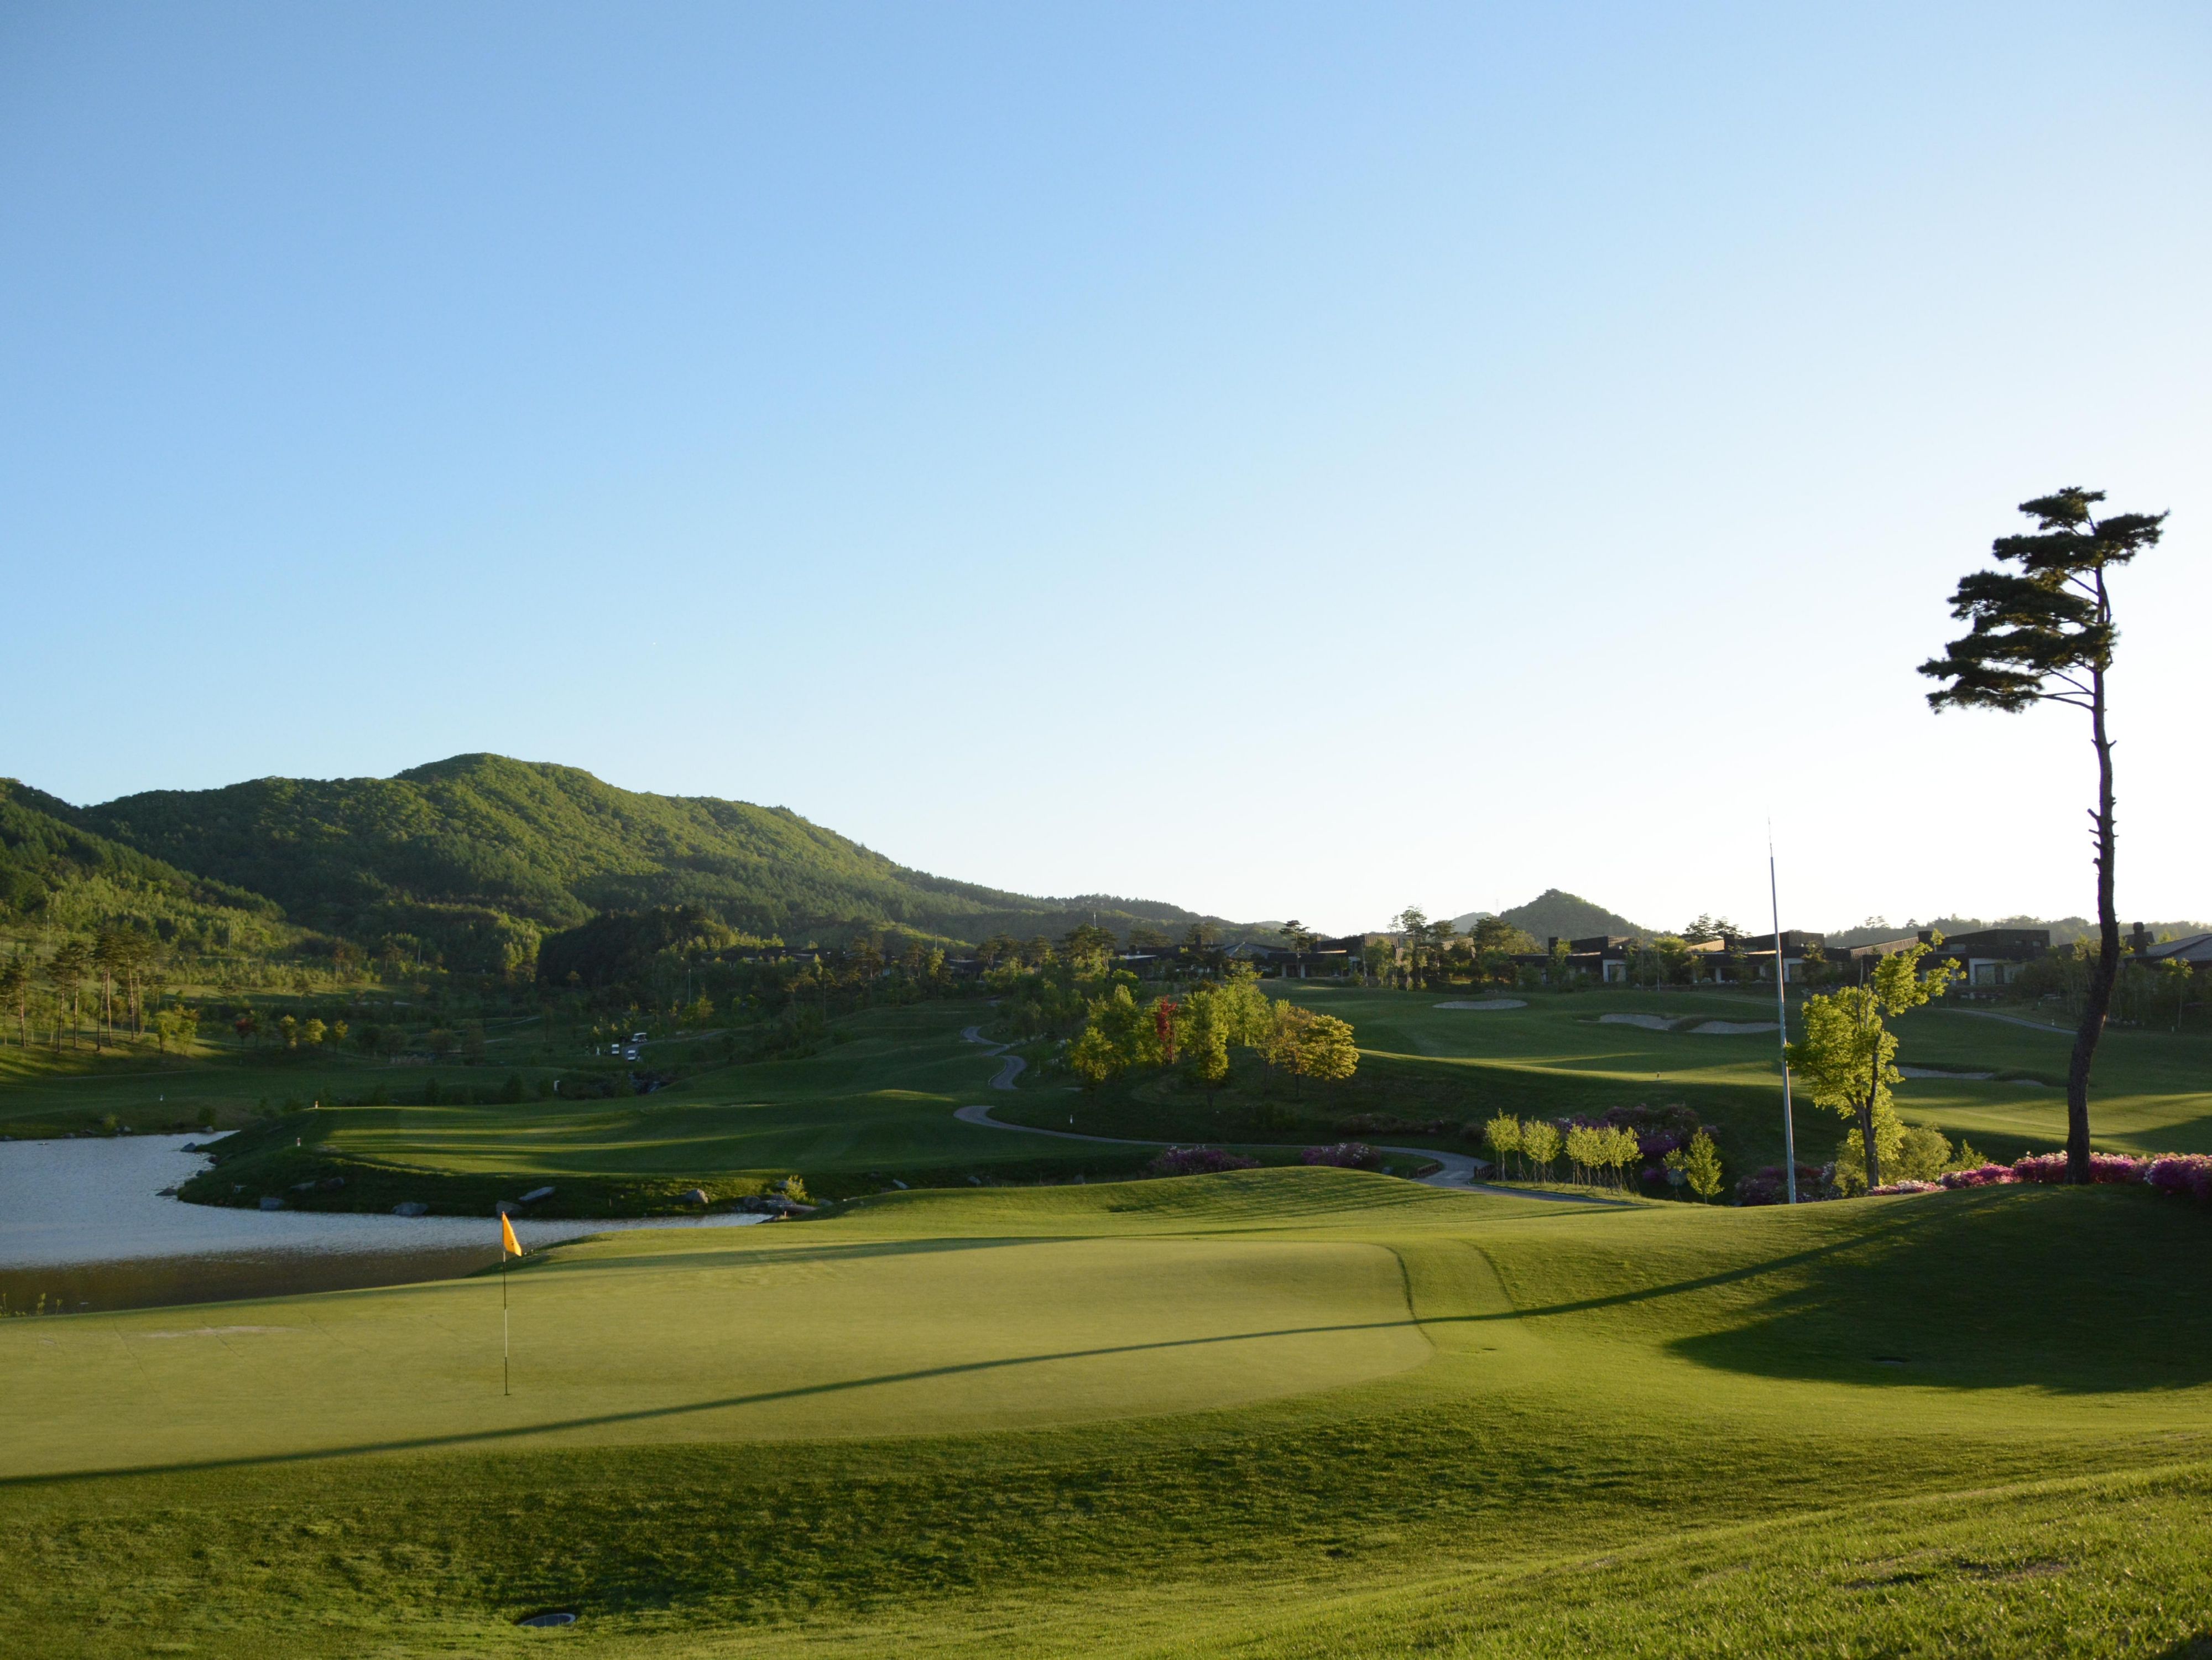 The golf course features a picturesque 18-hole course stretched out amidst the natural landscape of Daegwallyeong.